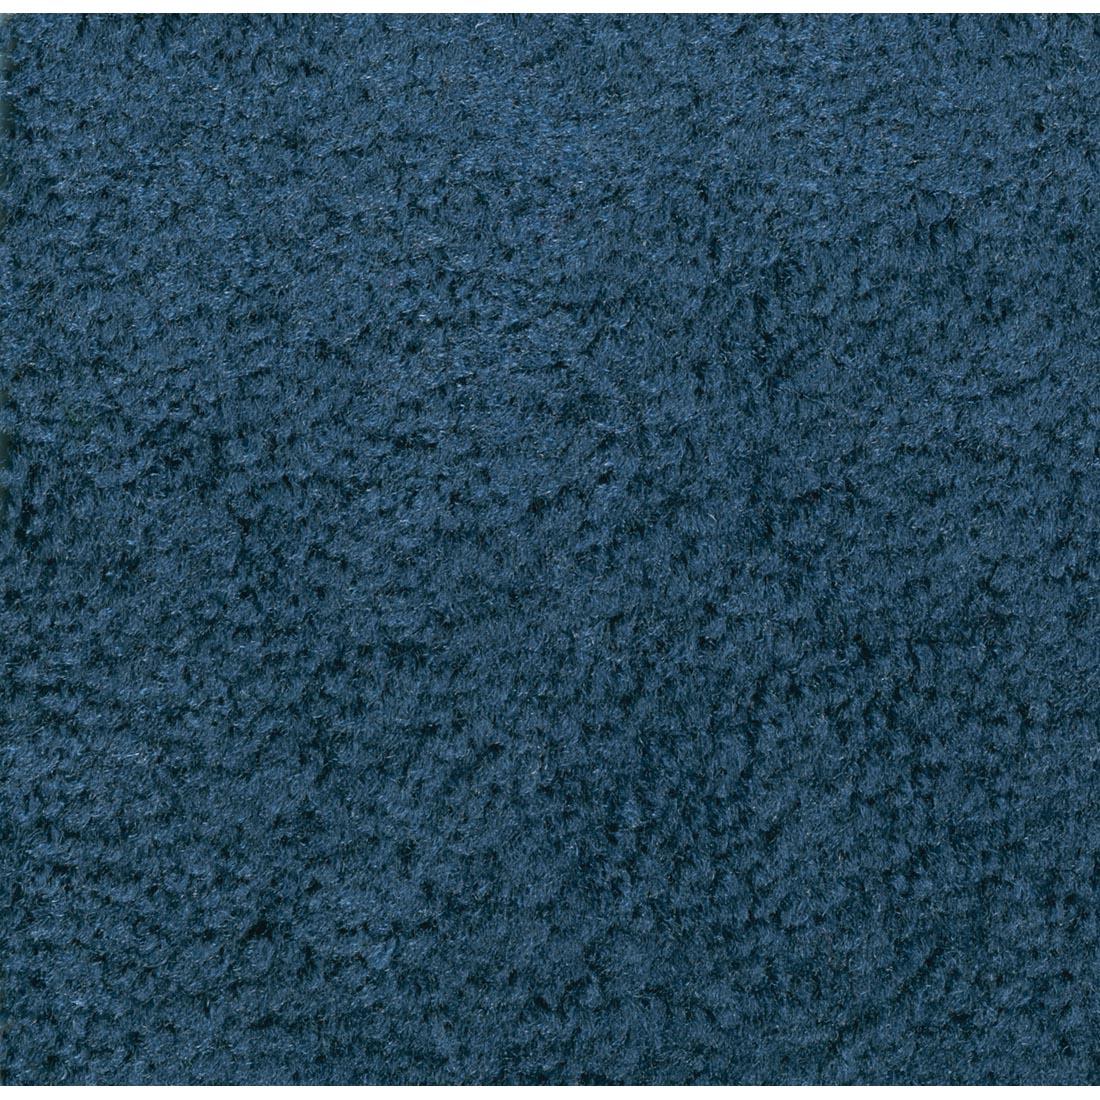 Blueberry-colored carpet swatch from the Rectangle Rug by Carpets For Kids